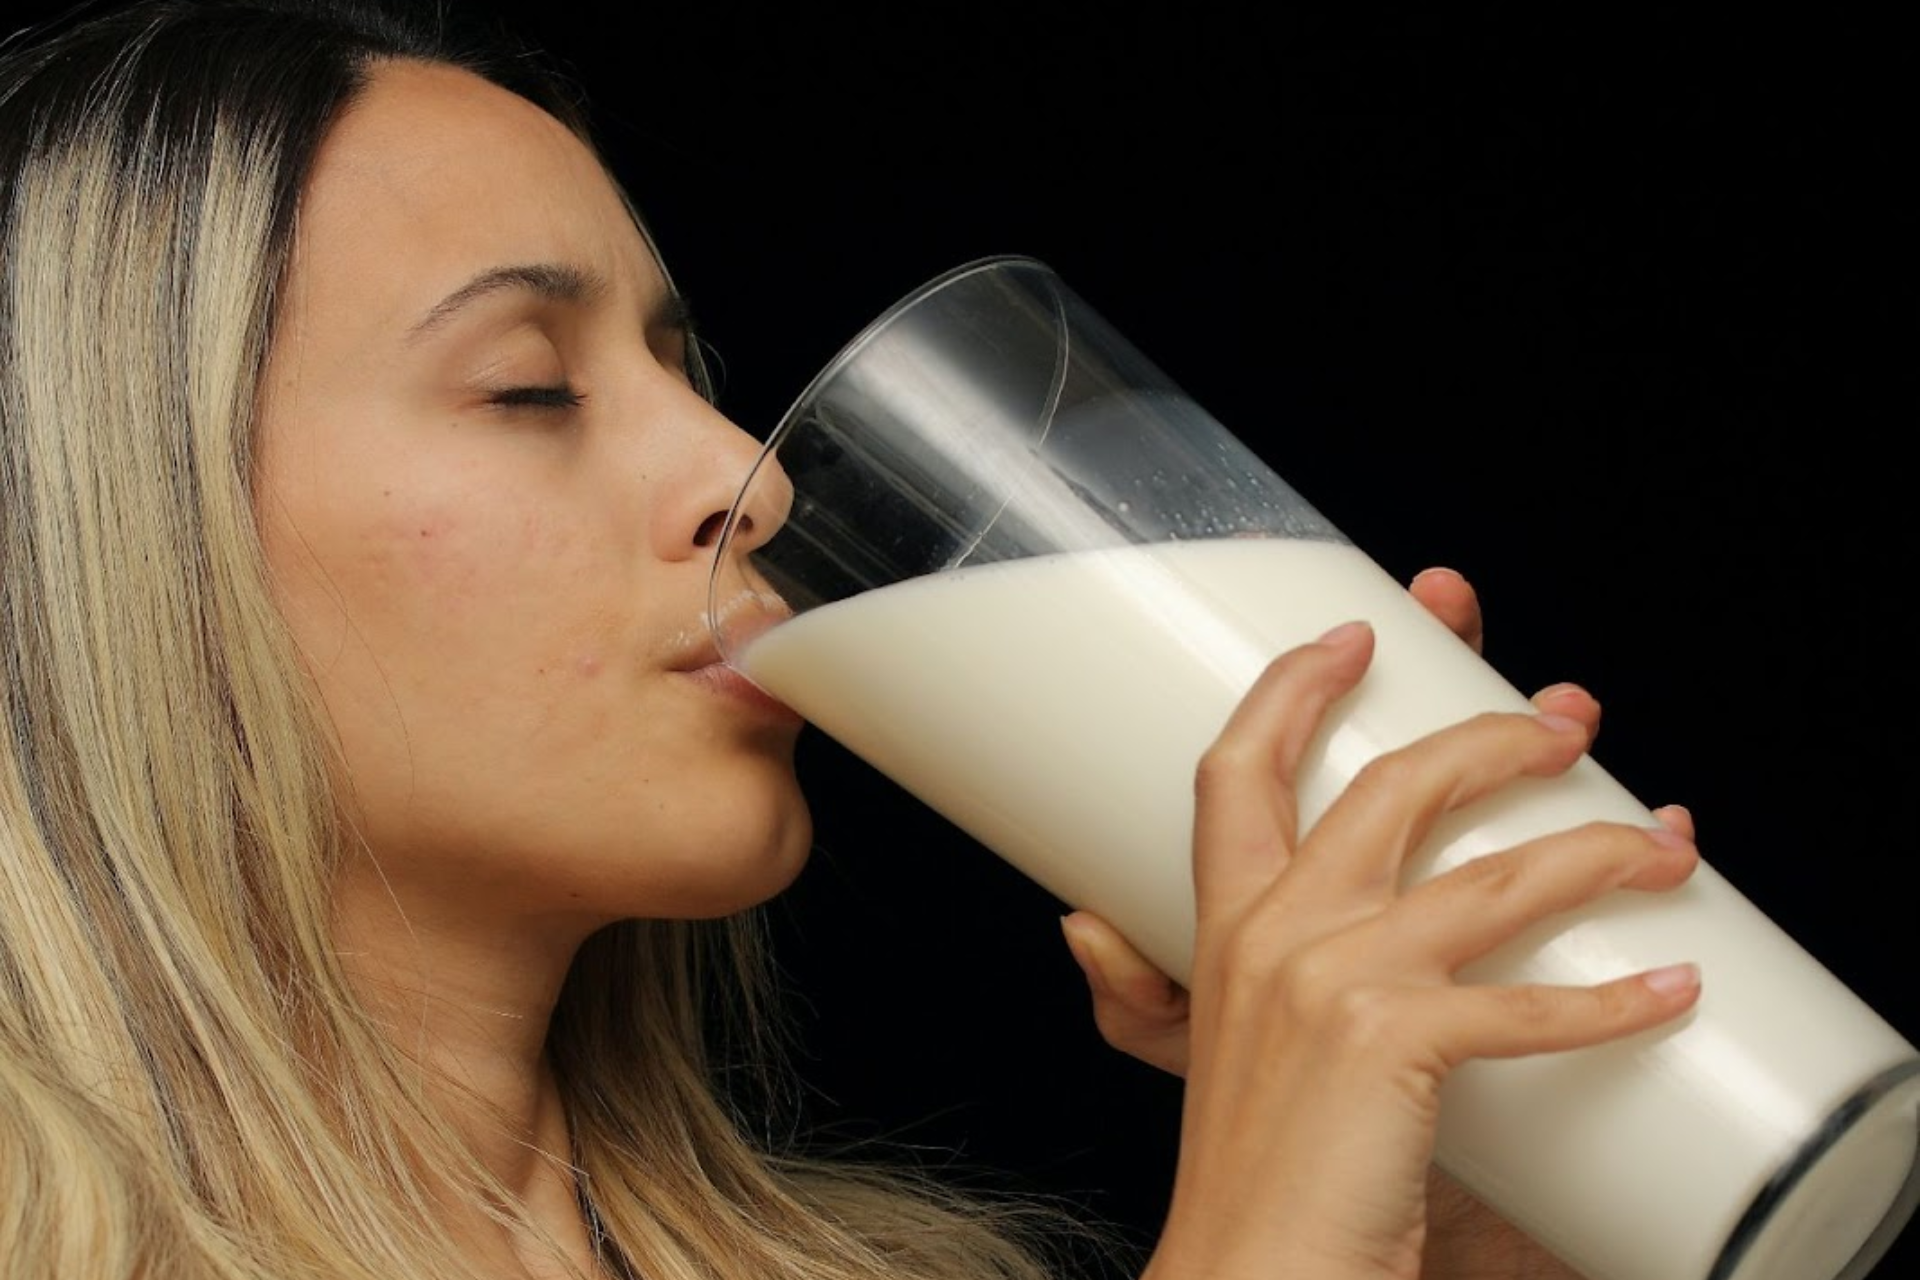 A woman drinking a large glass of milk